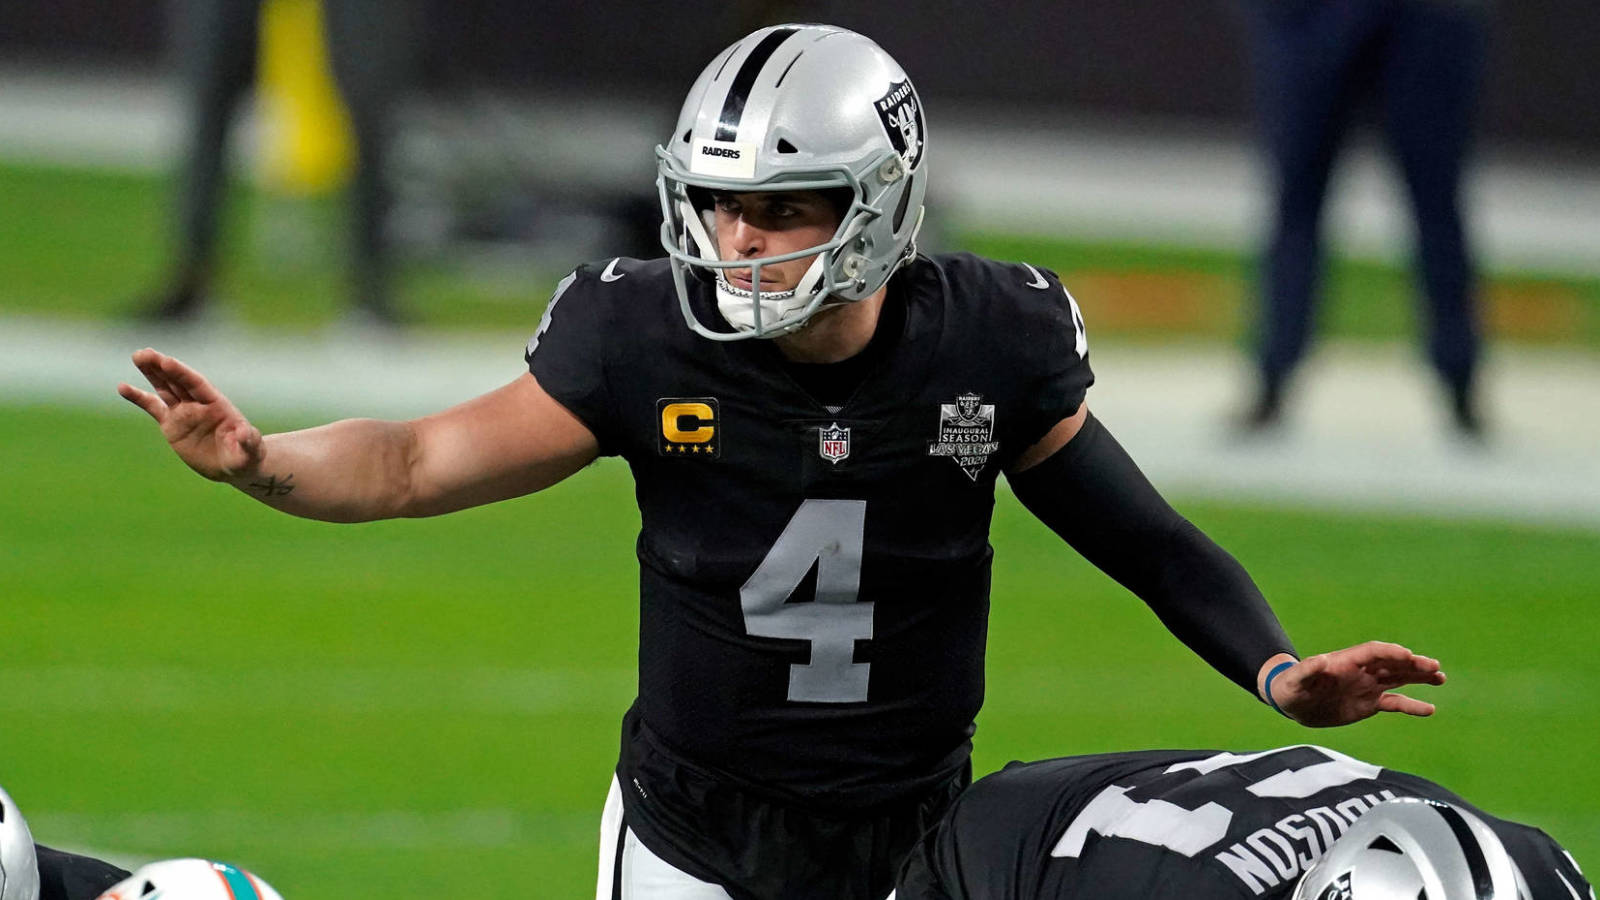 Report: Raiders declining trade offers for Carr